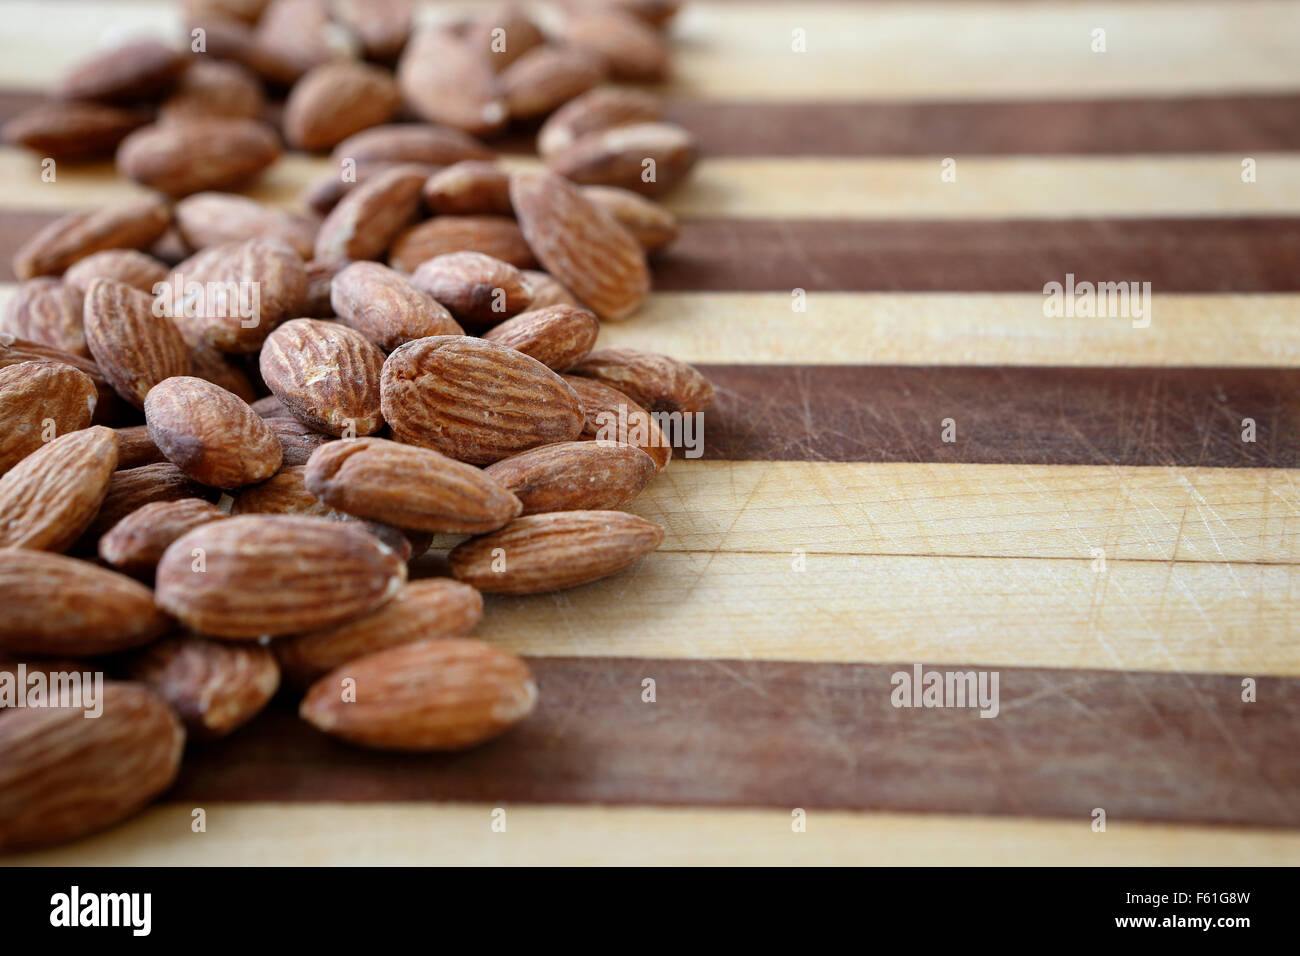 A bunch of almonds on a cutting board ready to become part of a healthy nutritious snack. Stock Photo